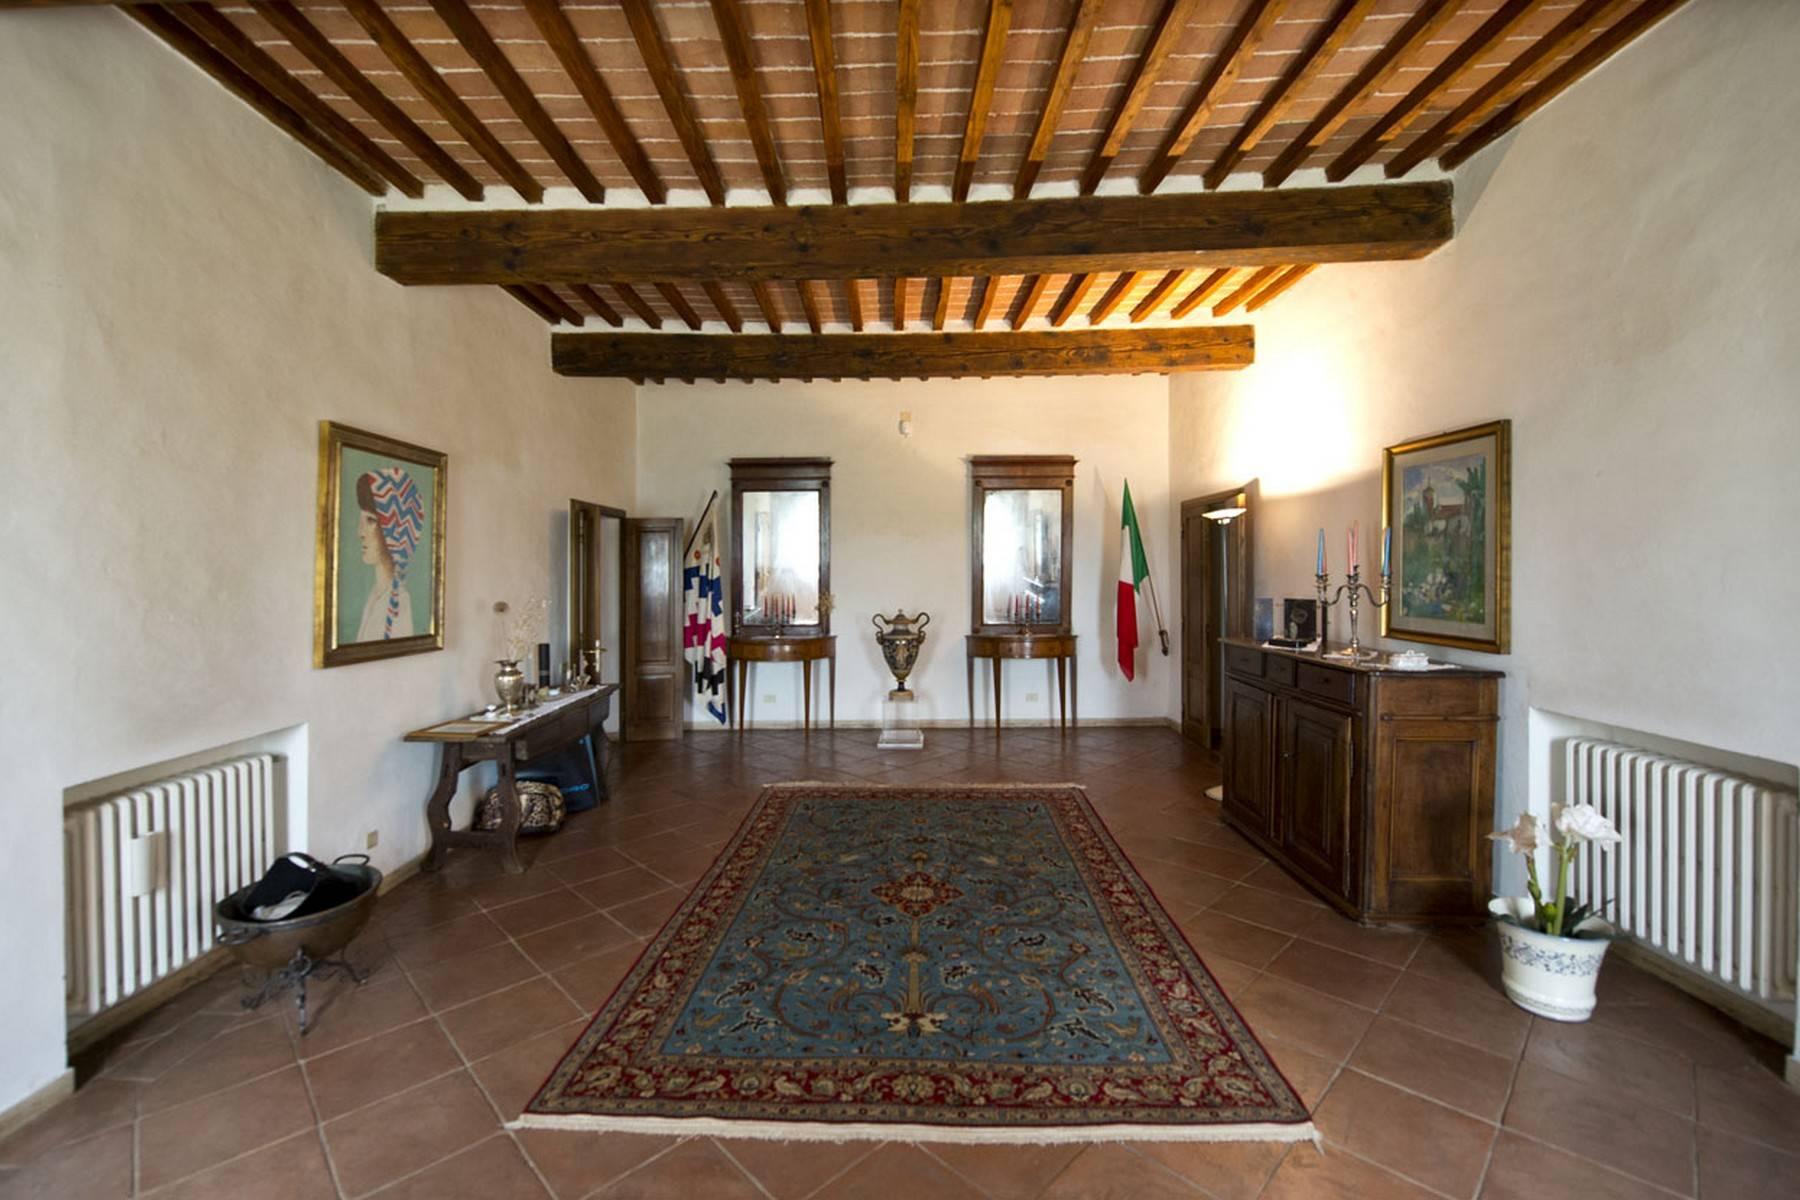 Aristocratic Villa for Sale on the Hills of Siena - 7